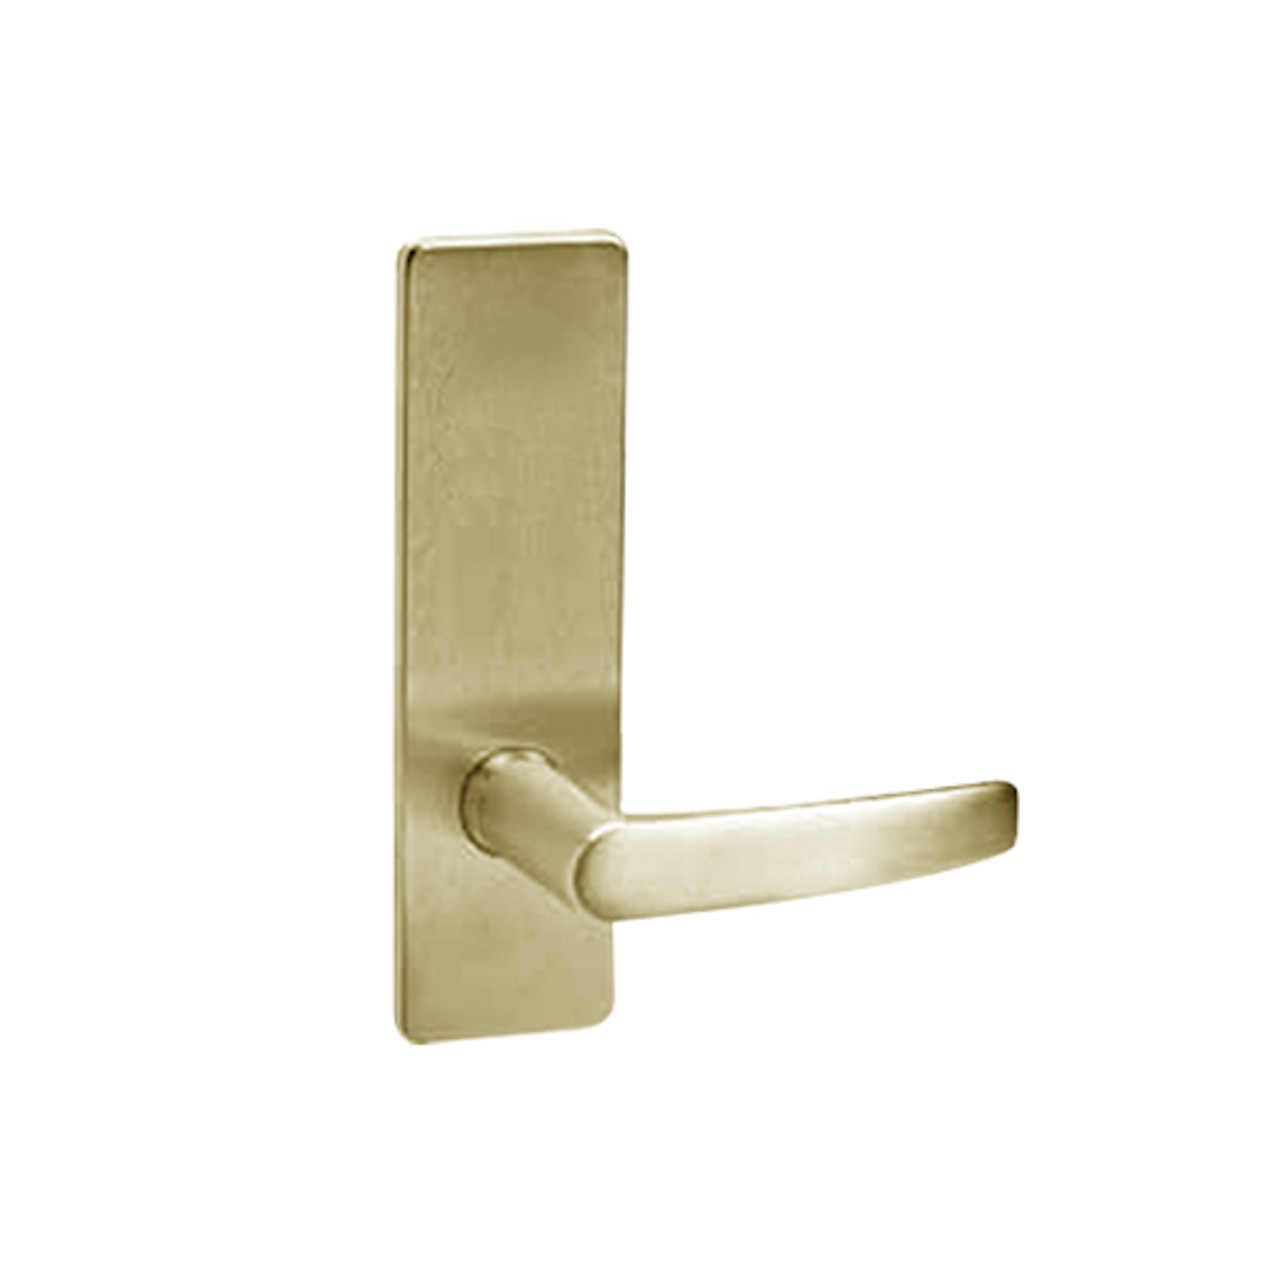 ML2020-ASR-606-M31 Corbin Russwin ML2000 Series Mortise Privacy Locksets with Armstrong Lever in Satin Brass